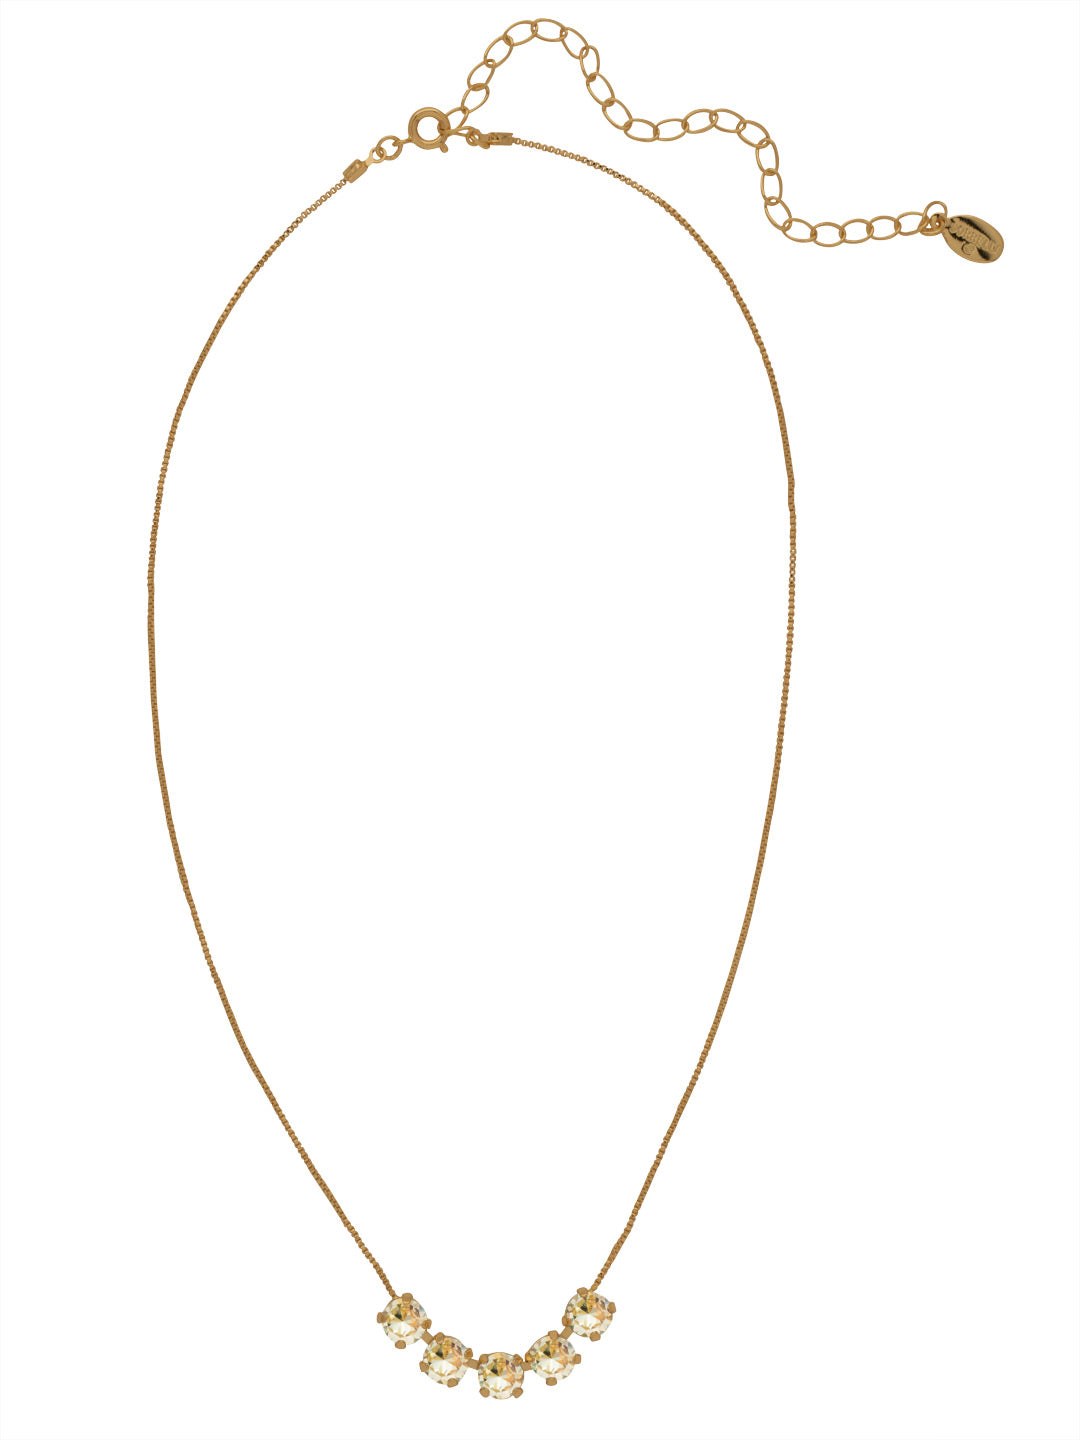 Shaughna Tennis Necklace - NFC84AGCCH - <p>The Shaughna Tennis Necklace features five crystals on a delicate adjustable chain. From Sorrelli's Crystal Champagne collection in our Antique Gold-tone finish.</p>